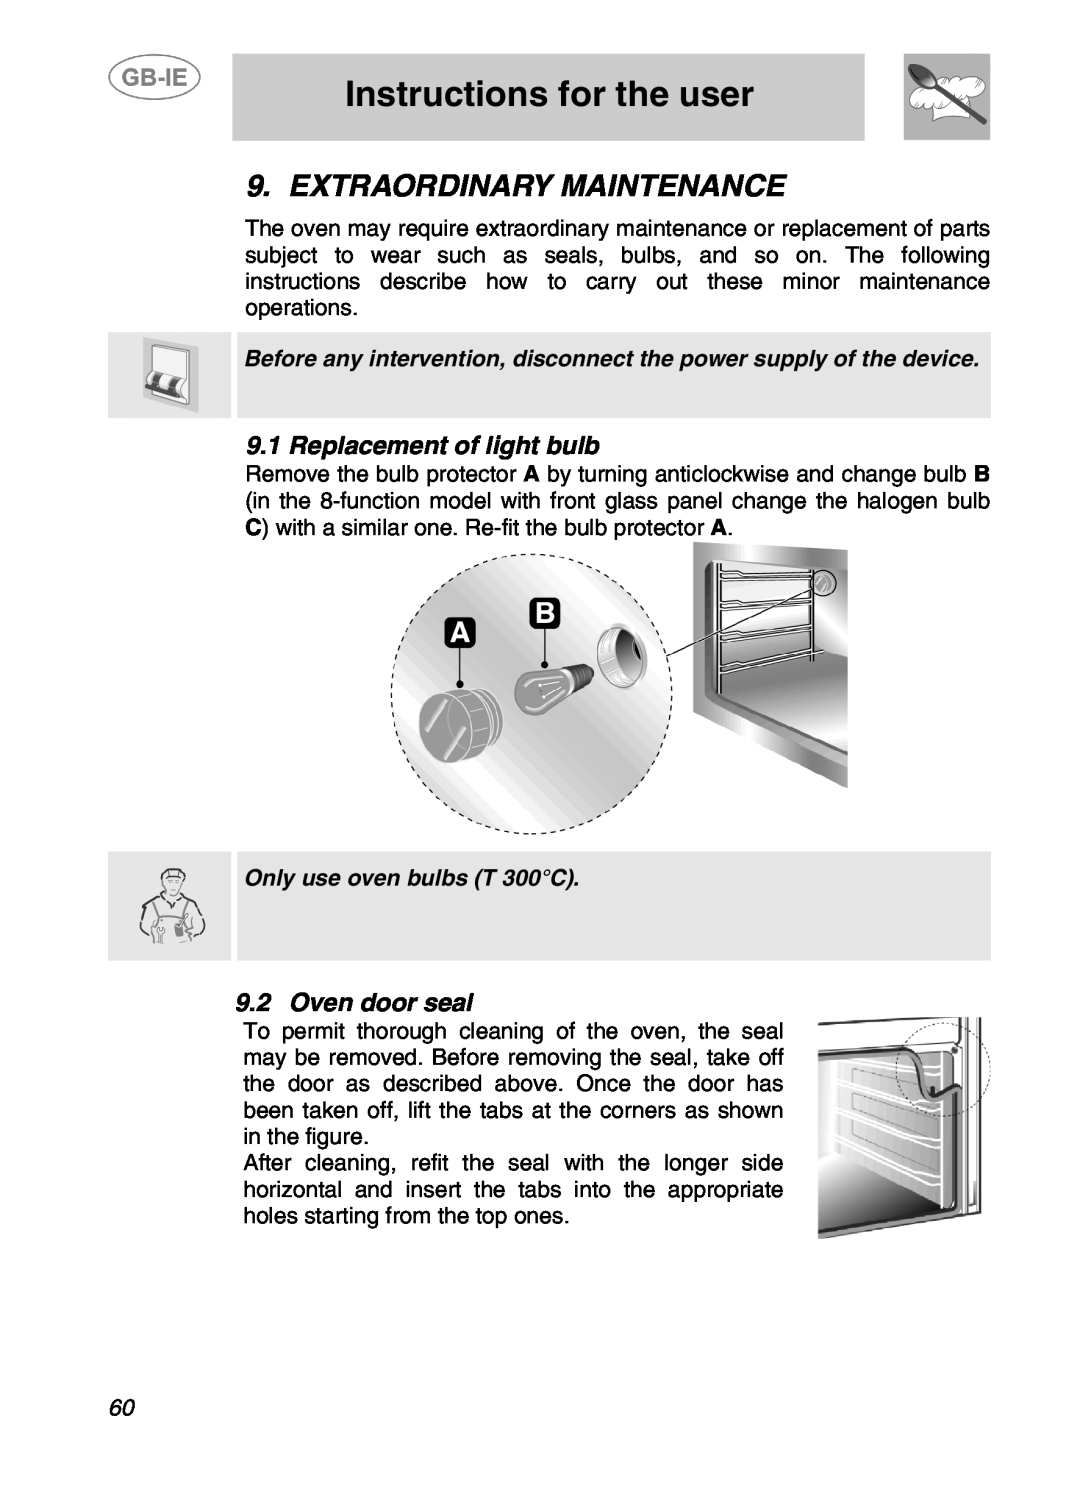 Smeg 166PZ-5 manual Extraordinary Maintenance, Replacement of light bulb, Oven door seal, Instructions for the user 